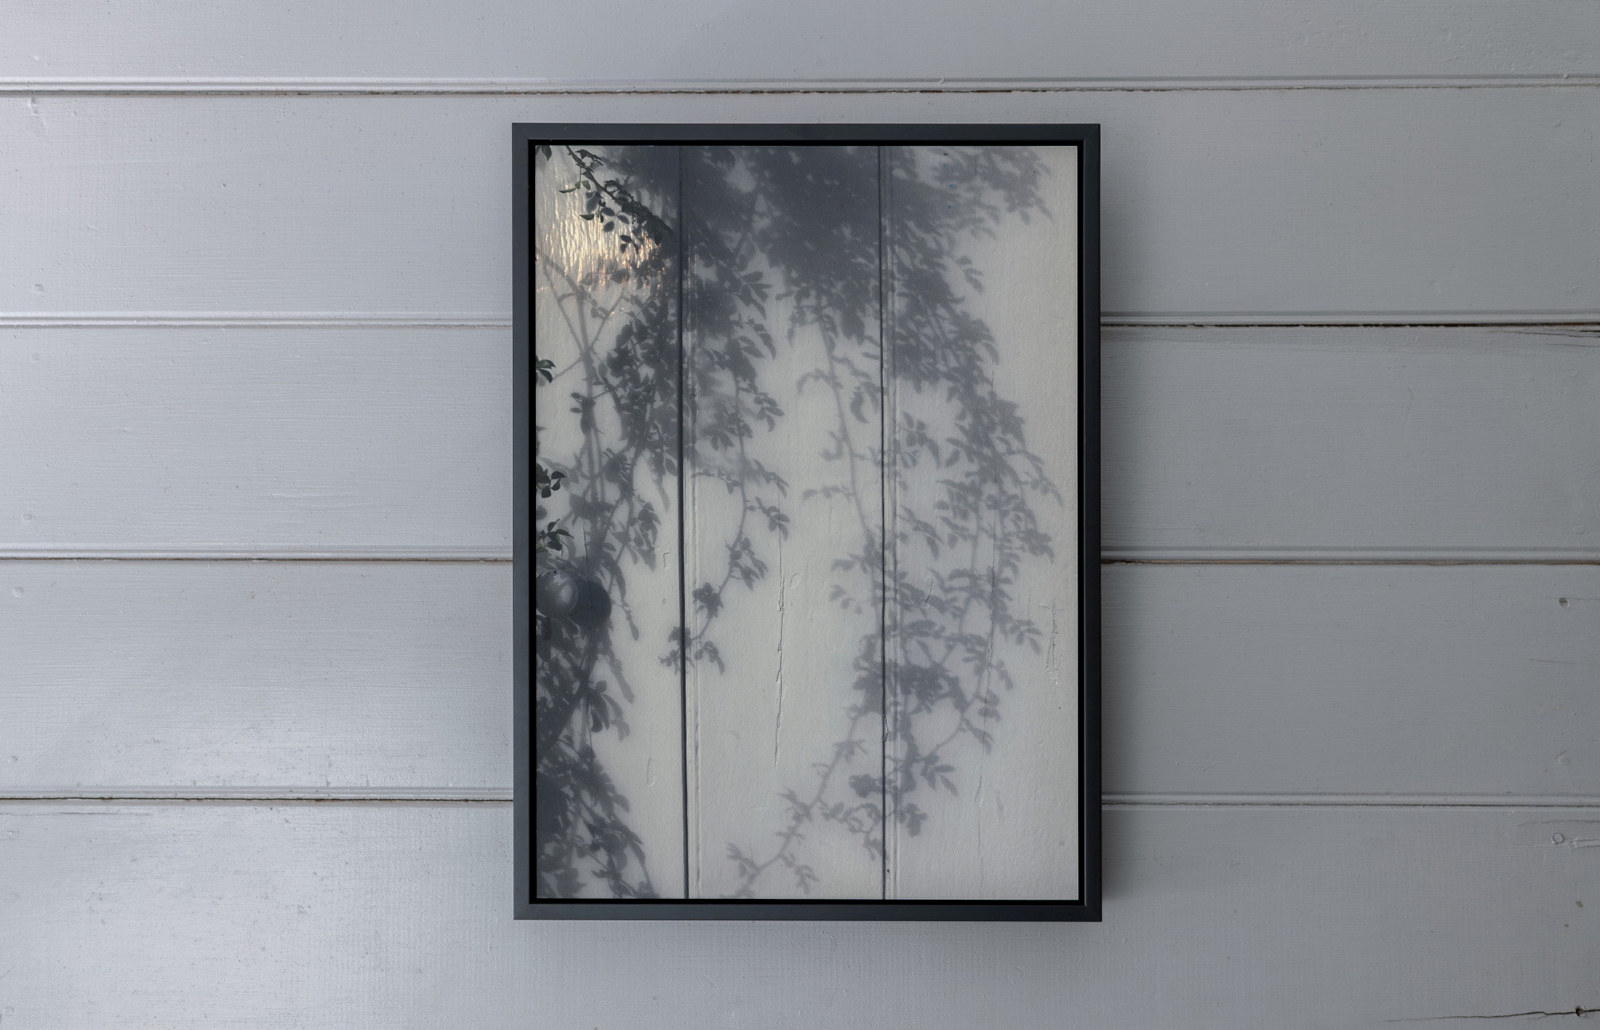 Photo of tree in frame on wall.